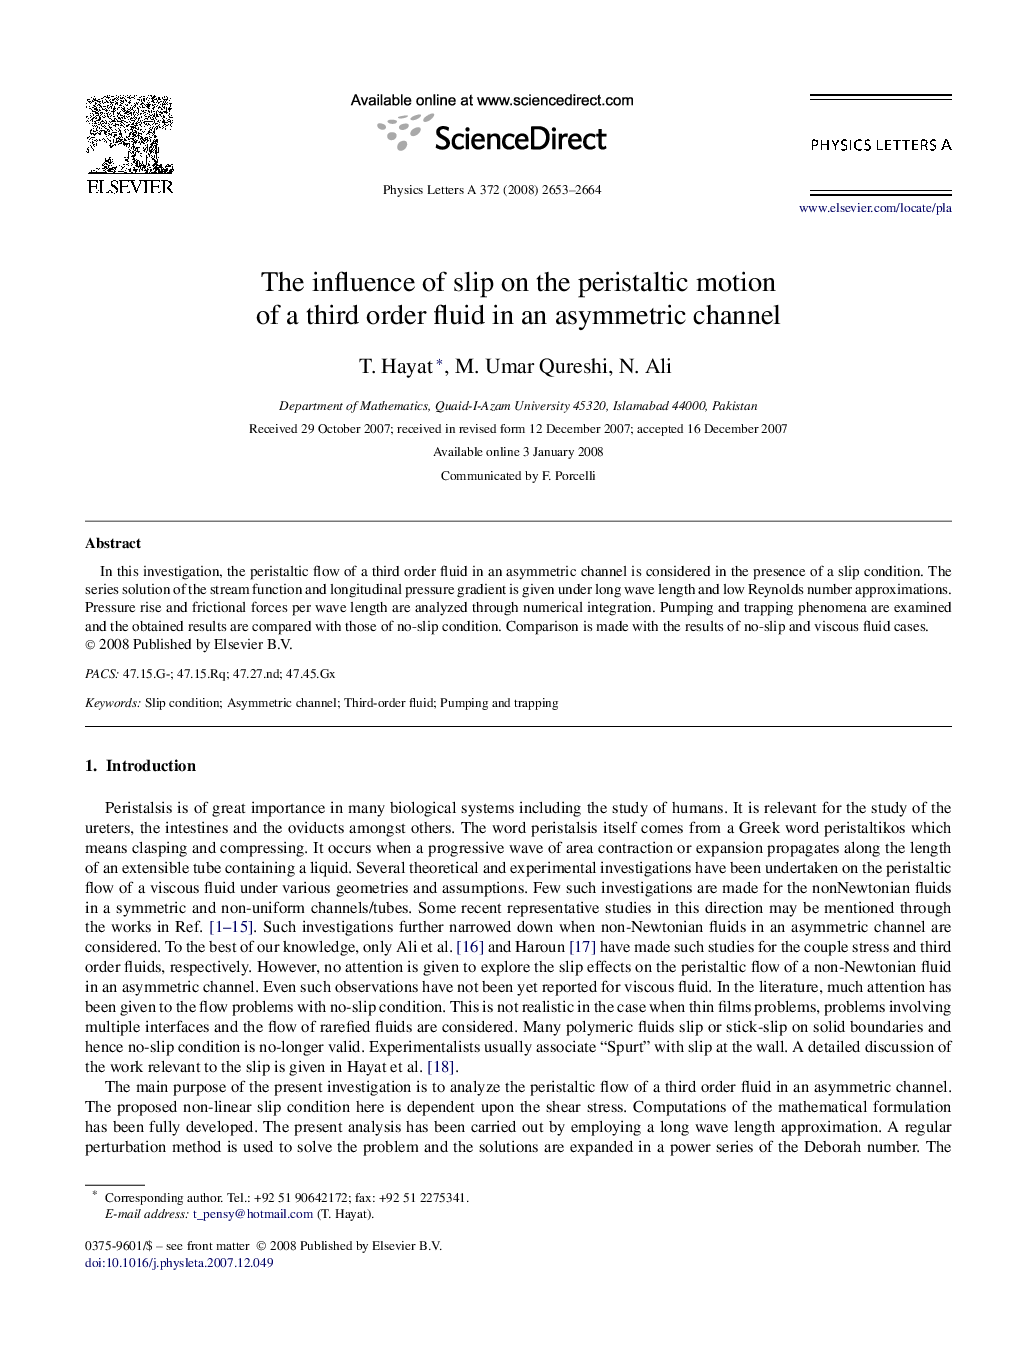 The influence of slip on the peristaltic motion of a third order fluid in an asymmetric channel